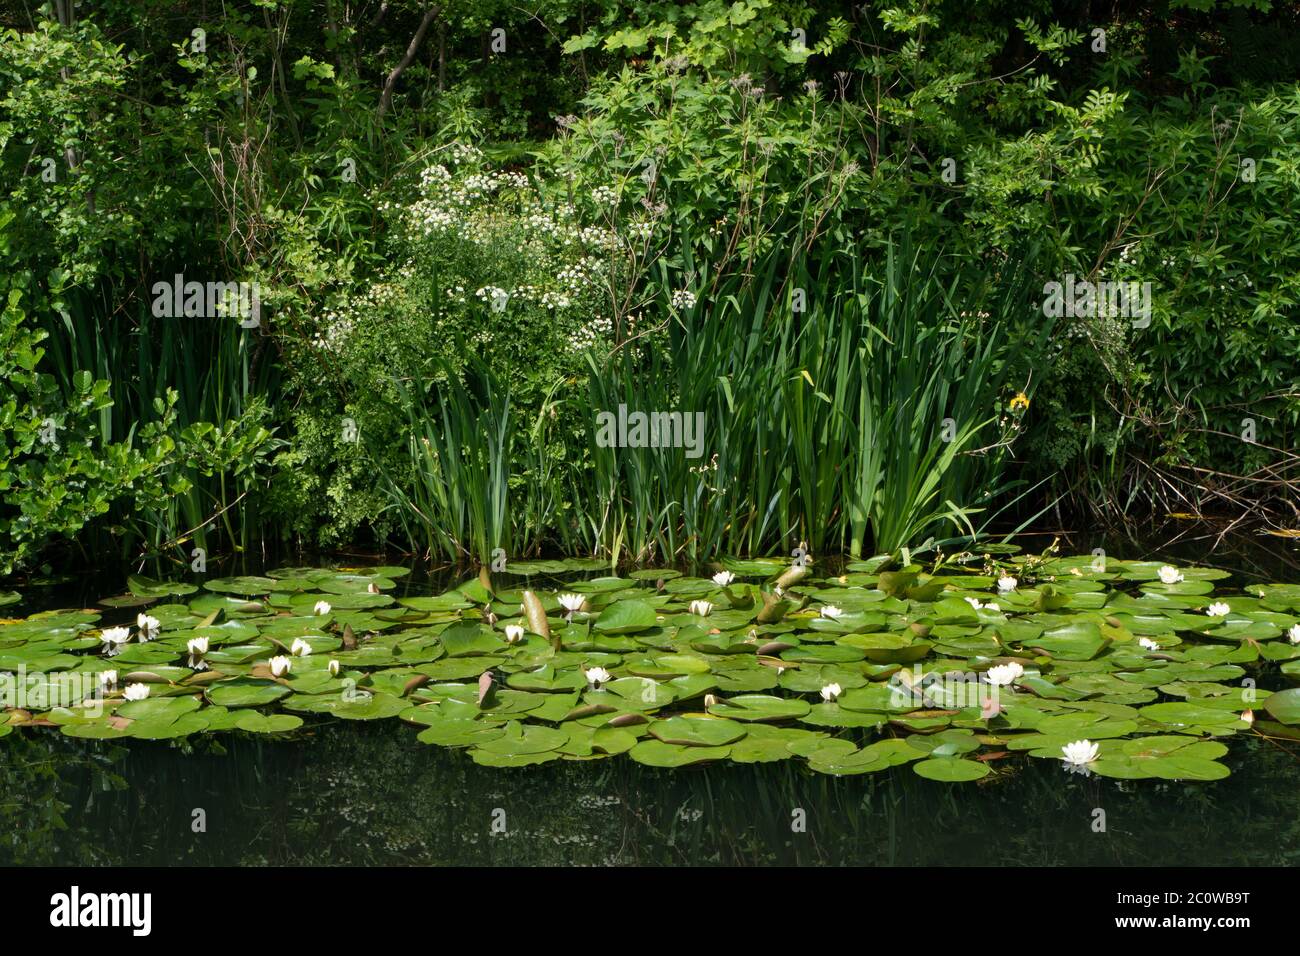 Lillies growing in the Stourbridge Canal near the Bonded Warehouse during the Coronavirus Lockdown. June 2020. West Midlands. UK Stock Photo